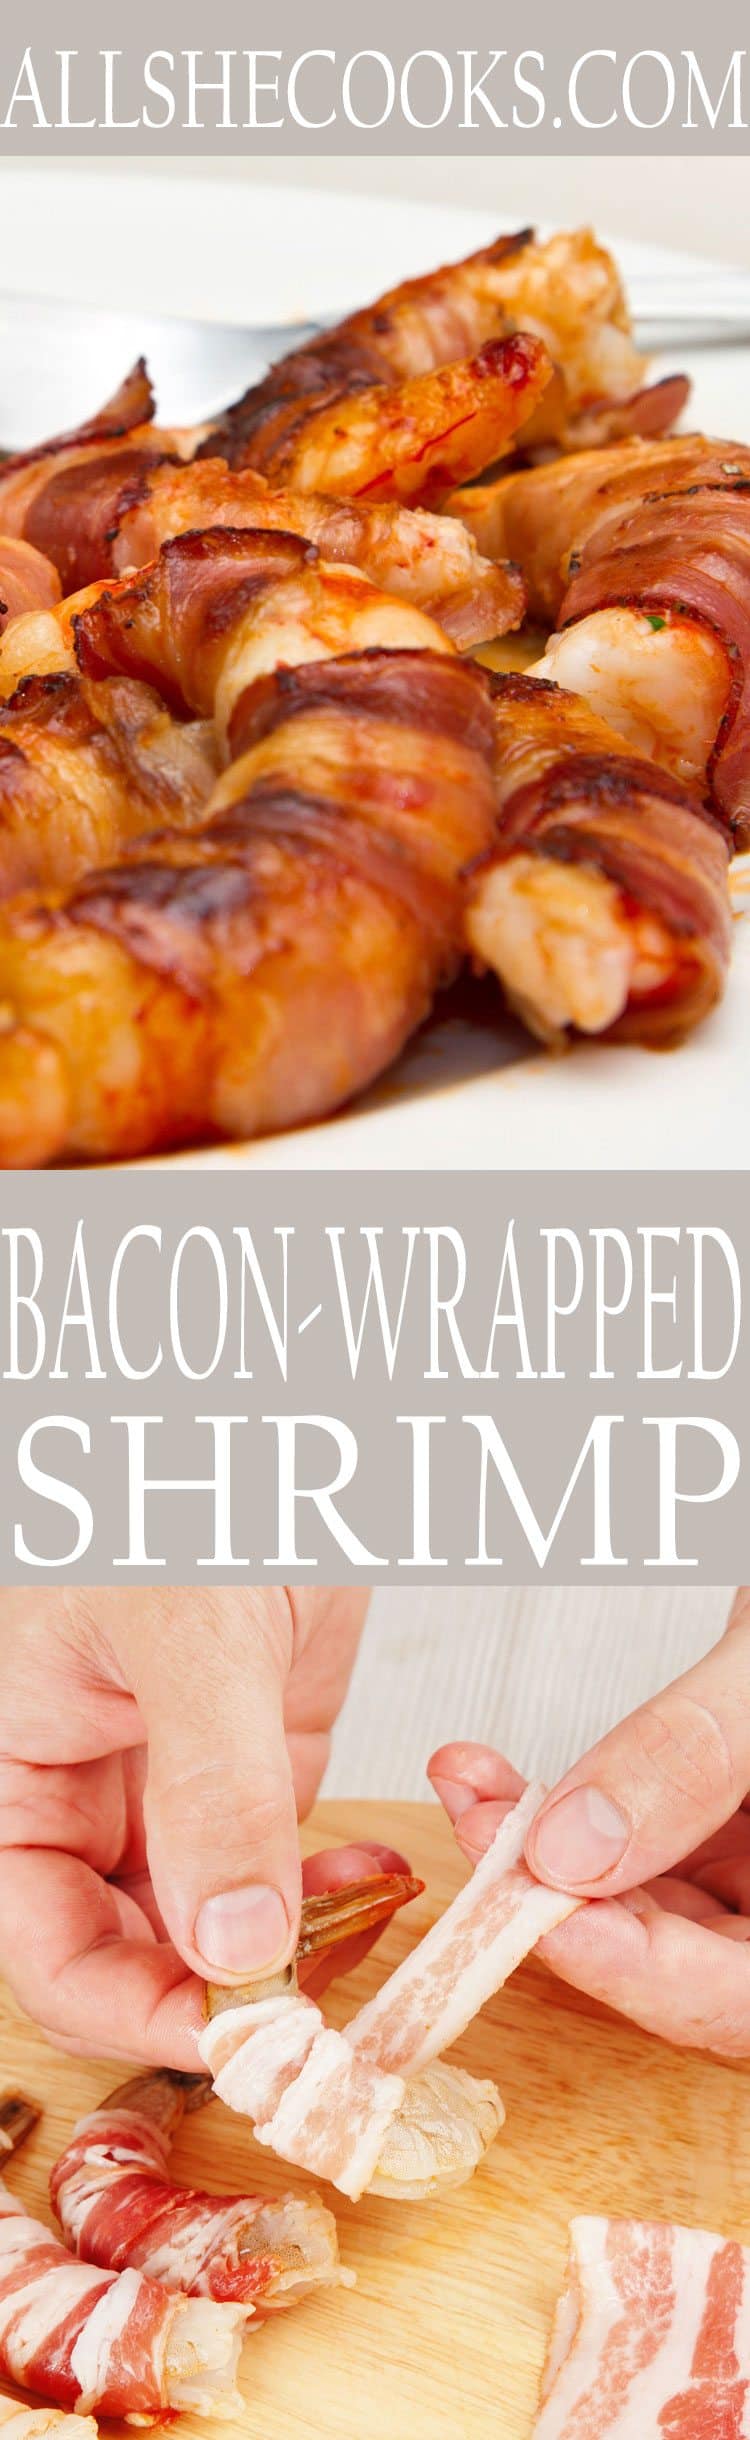 Enjoy bacon wrapped shrimp as appetizers or main dish recipe. This easy to make recipe is perfect for serving at a party. Finger food made perfect. bet-bacon-wrapped-shrimp-recipe-easy